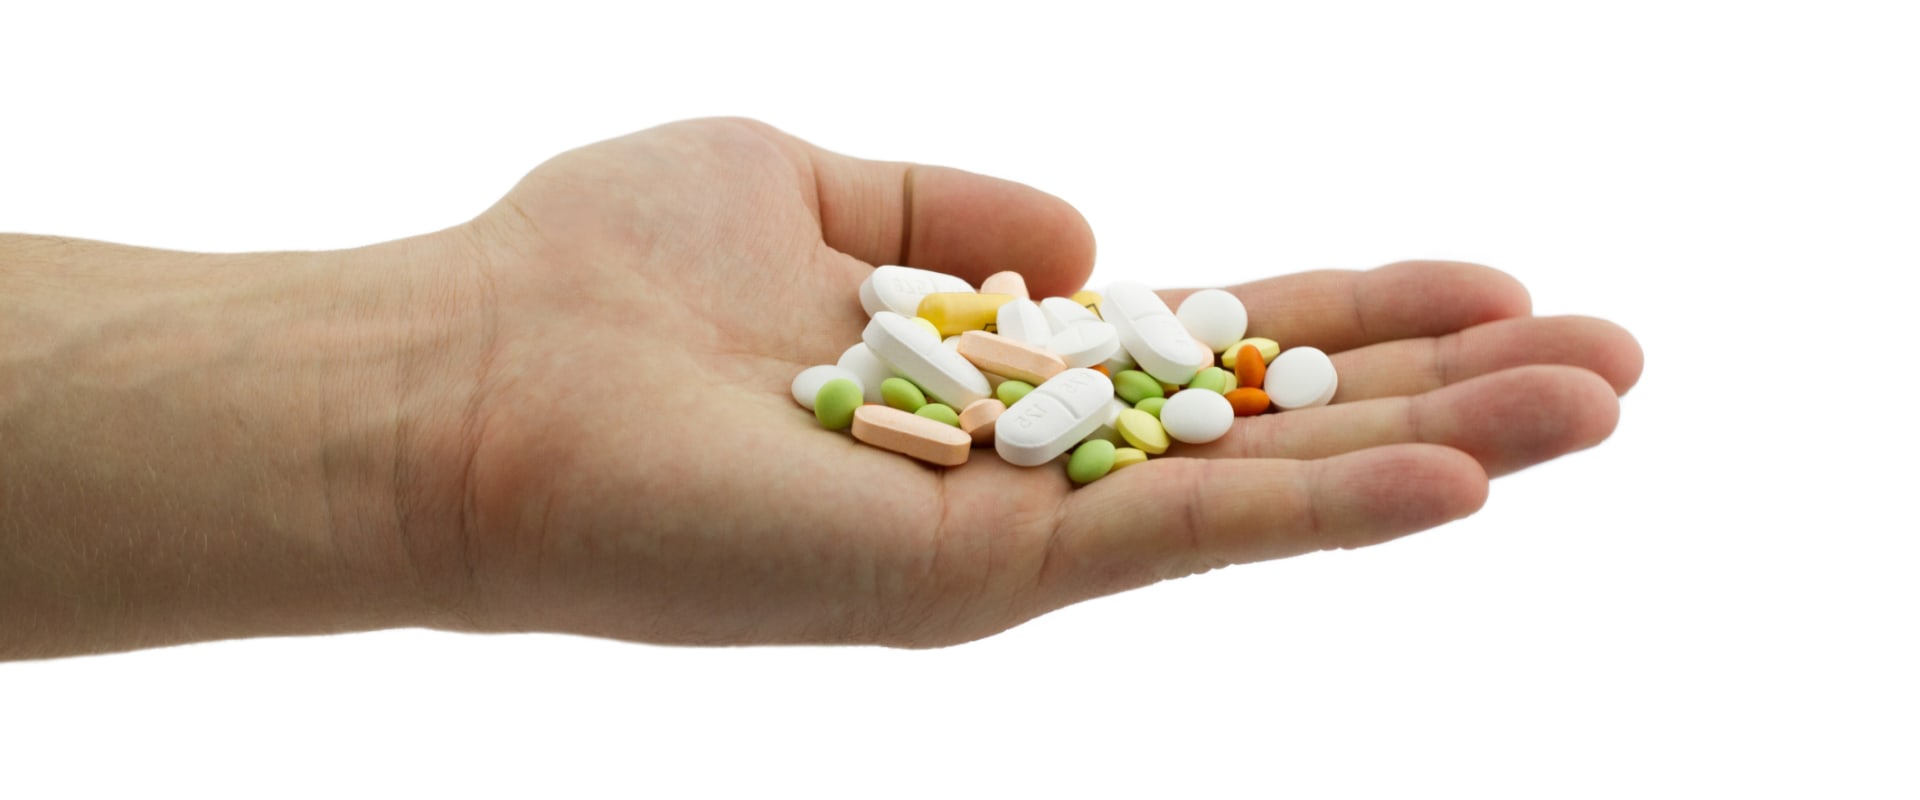 Is it safe to take multiple dietary supplements at once?